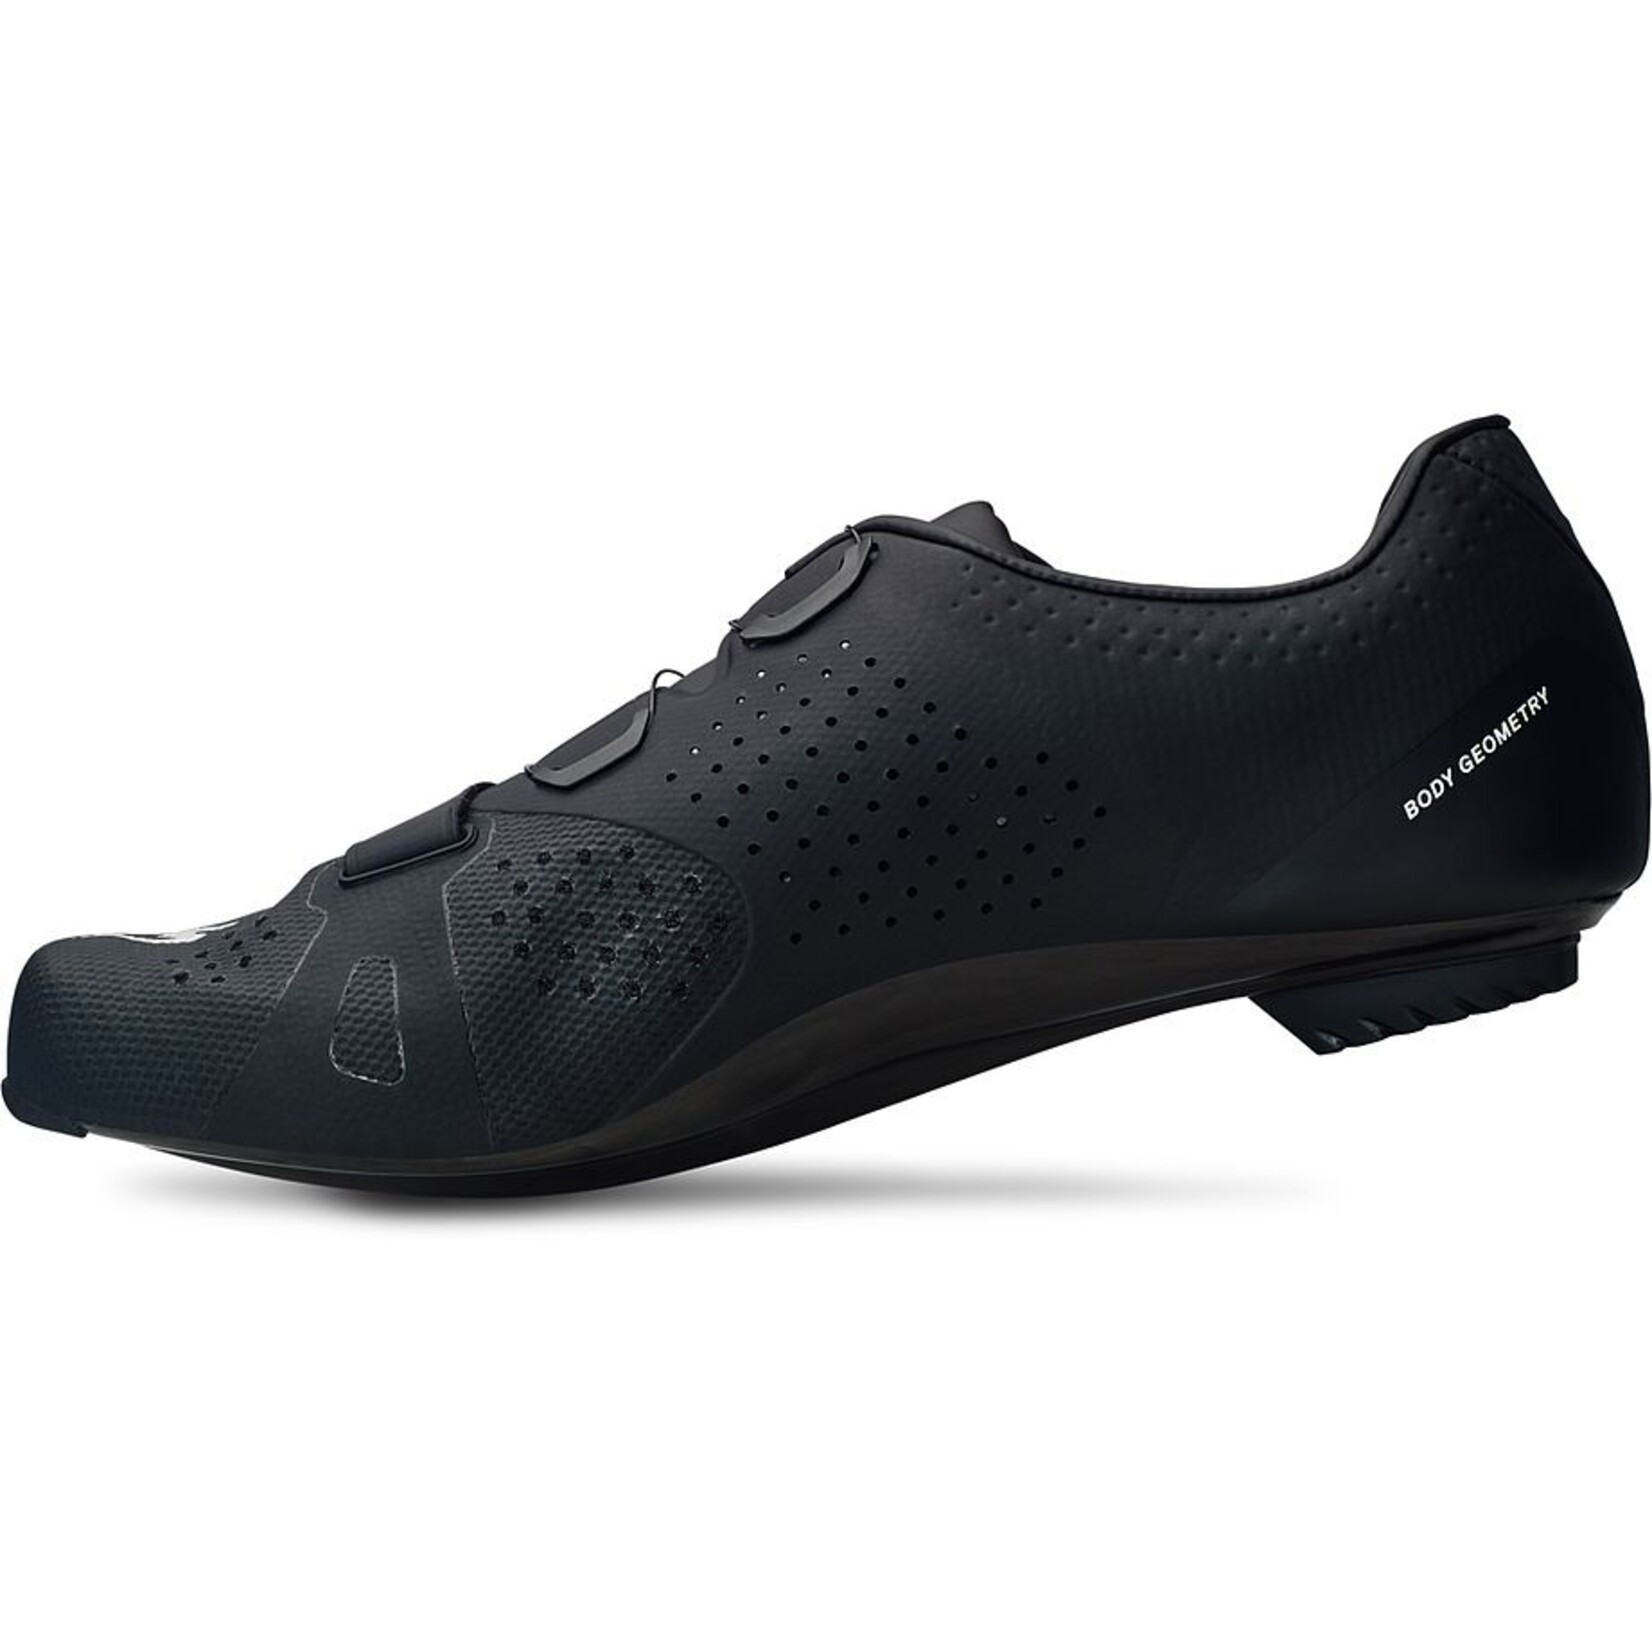 Specialized Torch 3.0 Road Shoes in White